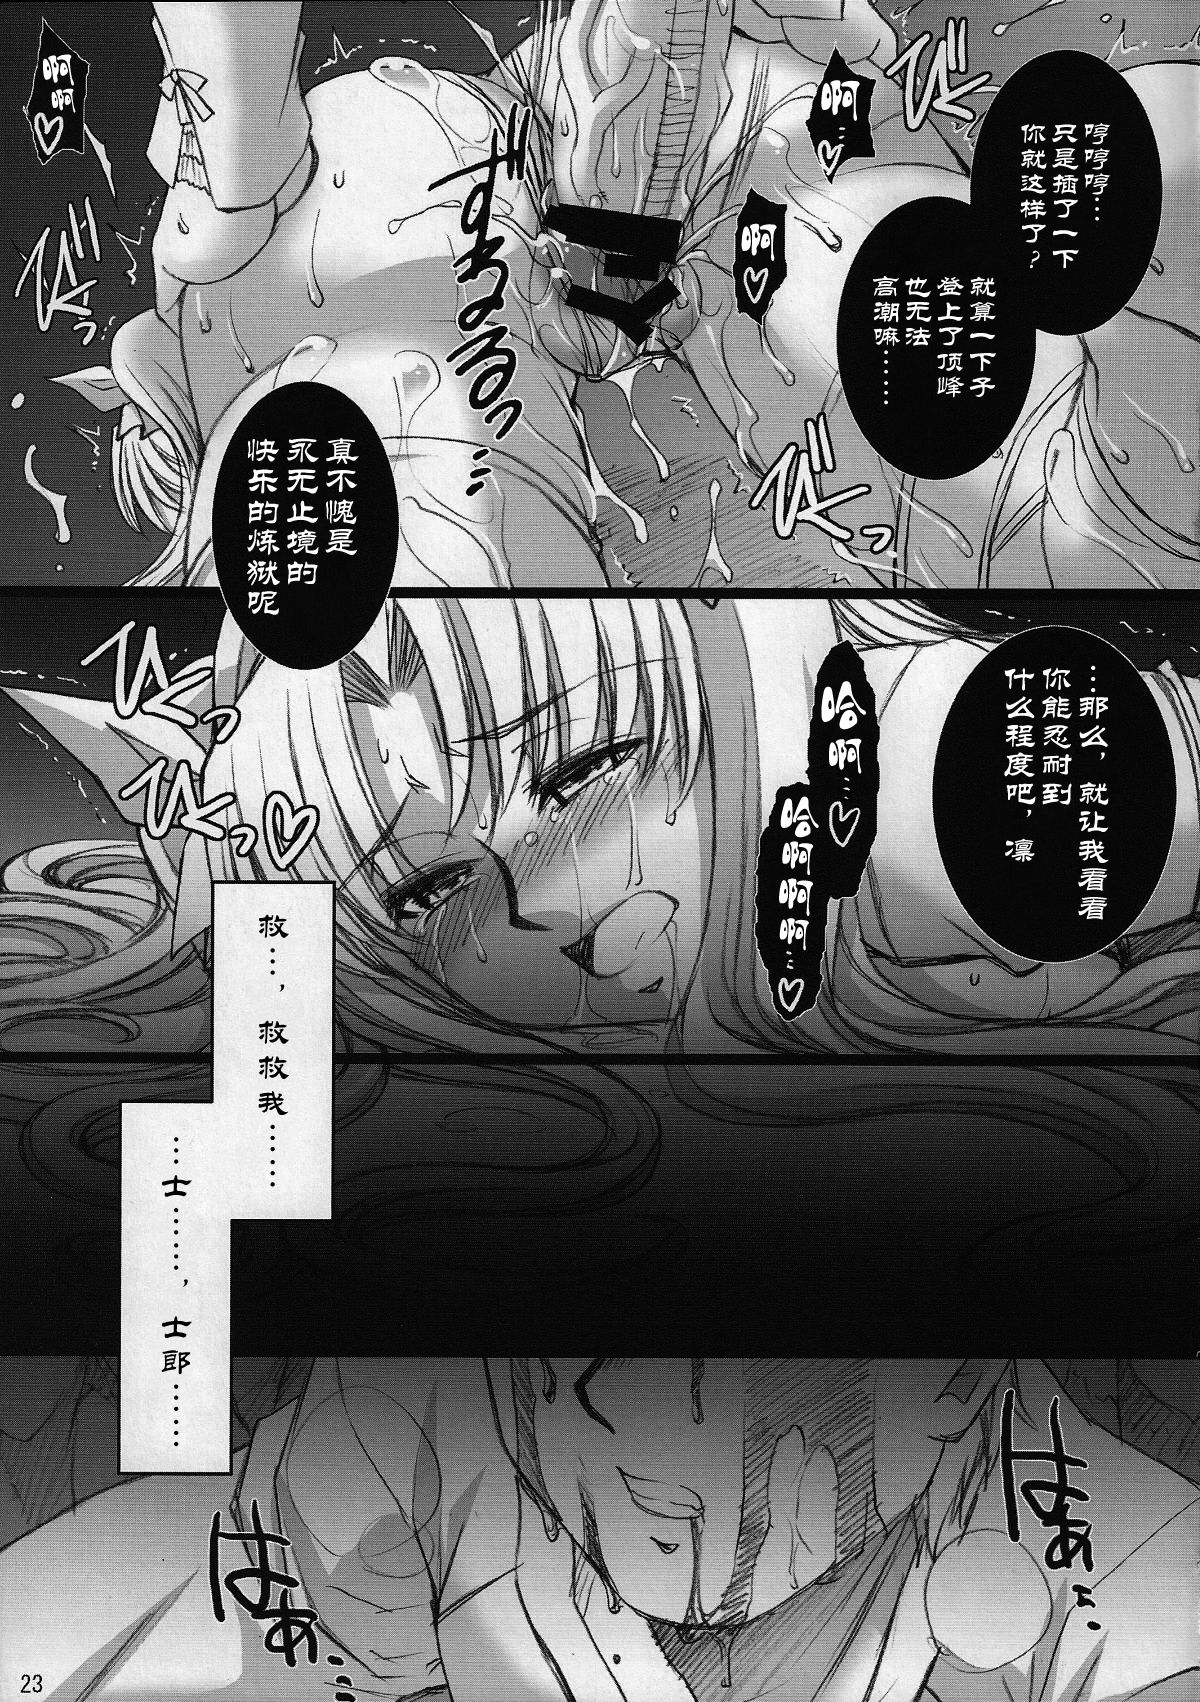 (COMIC1☆2) [H.B (B-RIVER)] Red Degeneration -DAY/3- (Fate/stay night) [Chinese] [不咕鸟汉化组] page 22 full